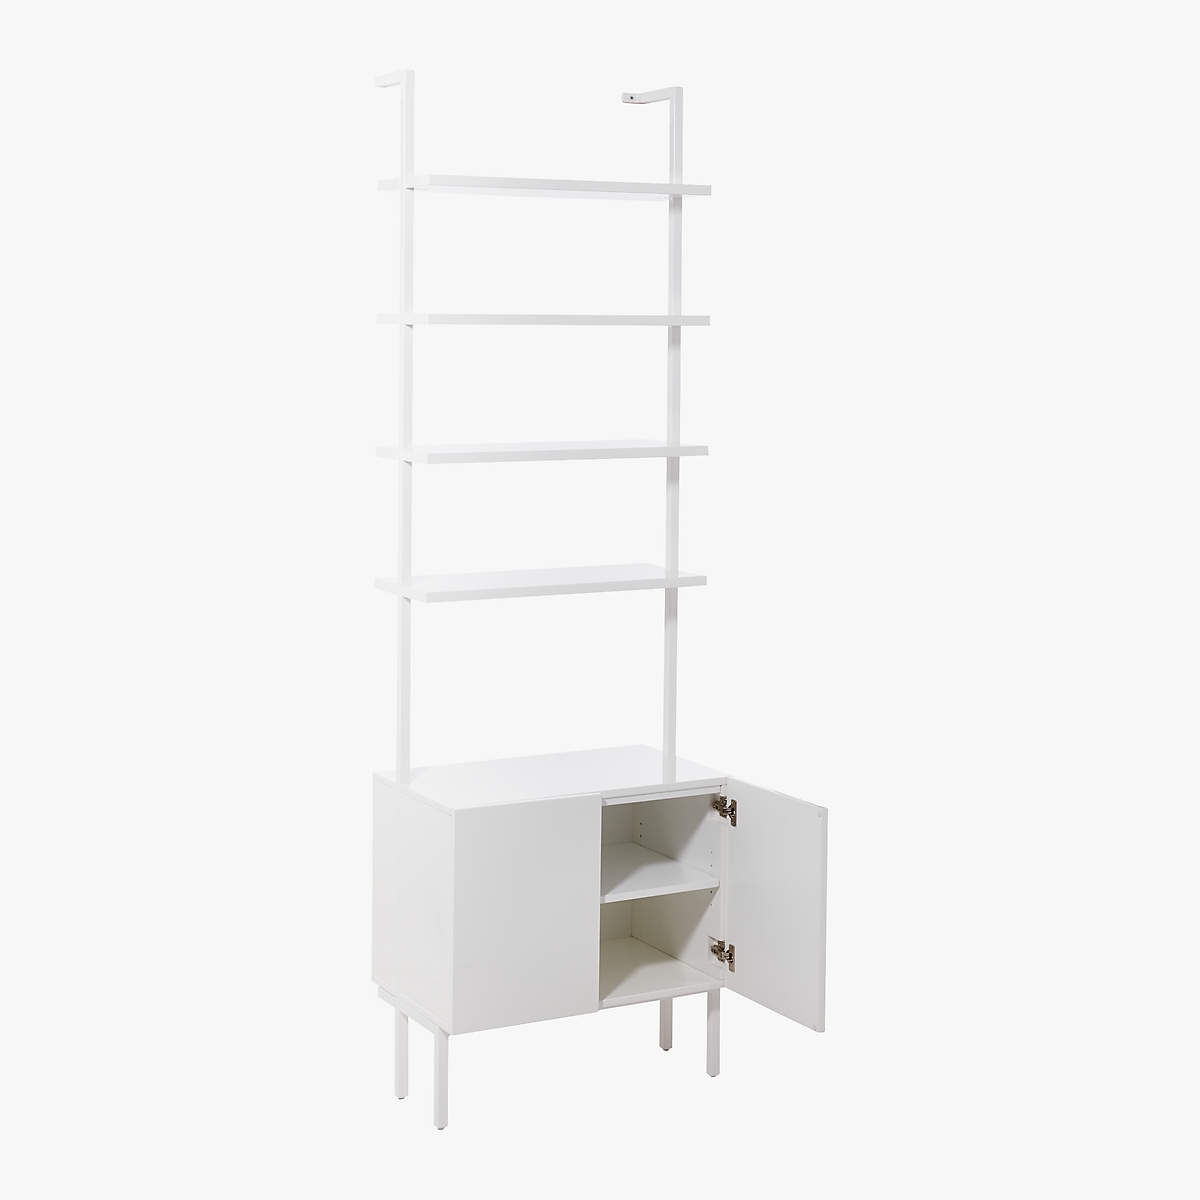 STAIRWAY WHITE CABINET - 96" HEIGHT RESTOCK Mid July 2023 - Image 1